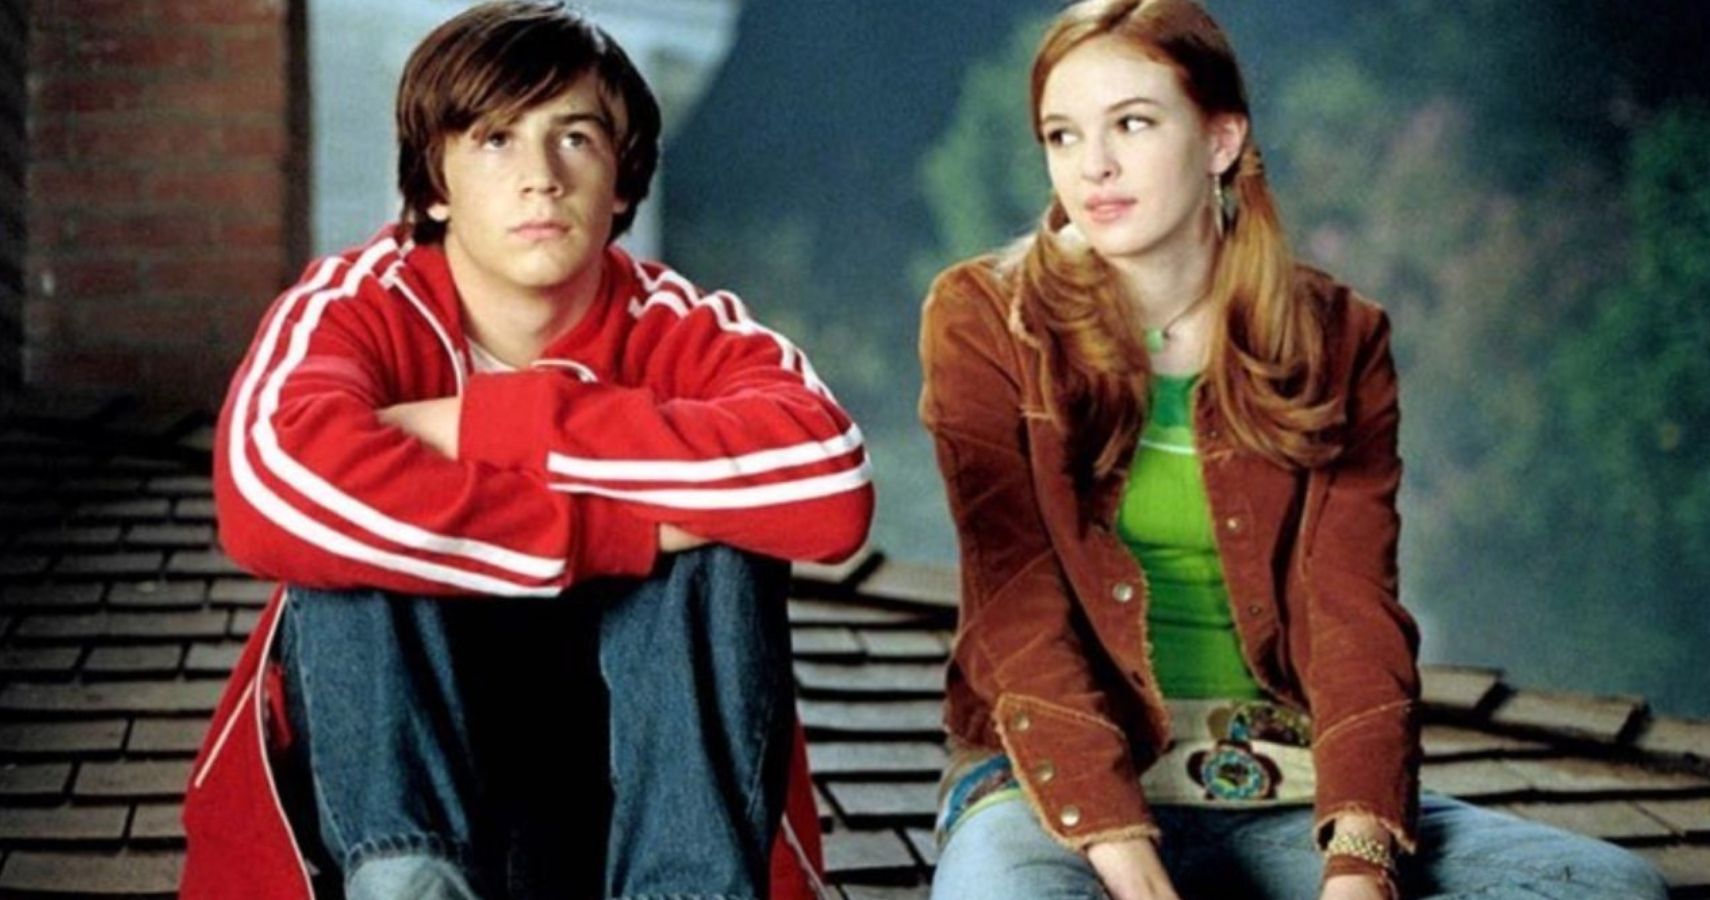 Sky High: 10 Interesting Facts You Need To Know About Danielle Panabaker's  Character, Layla